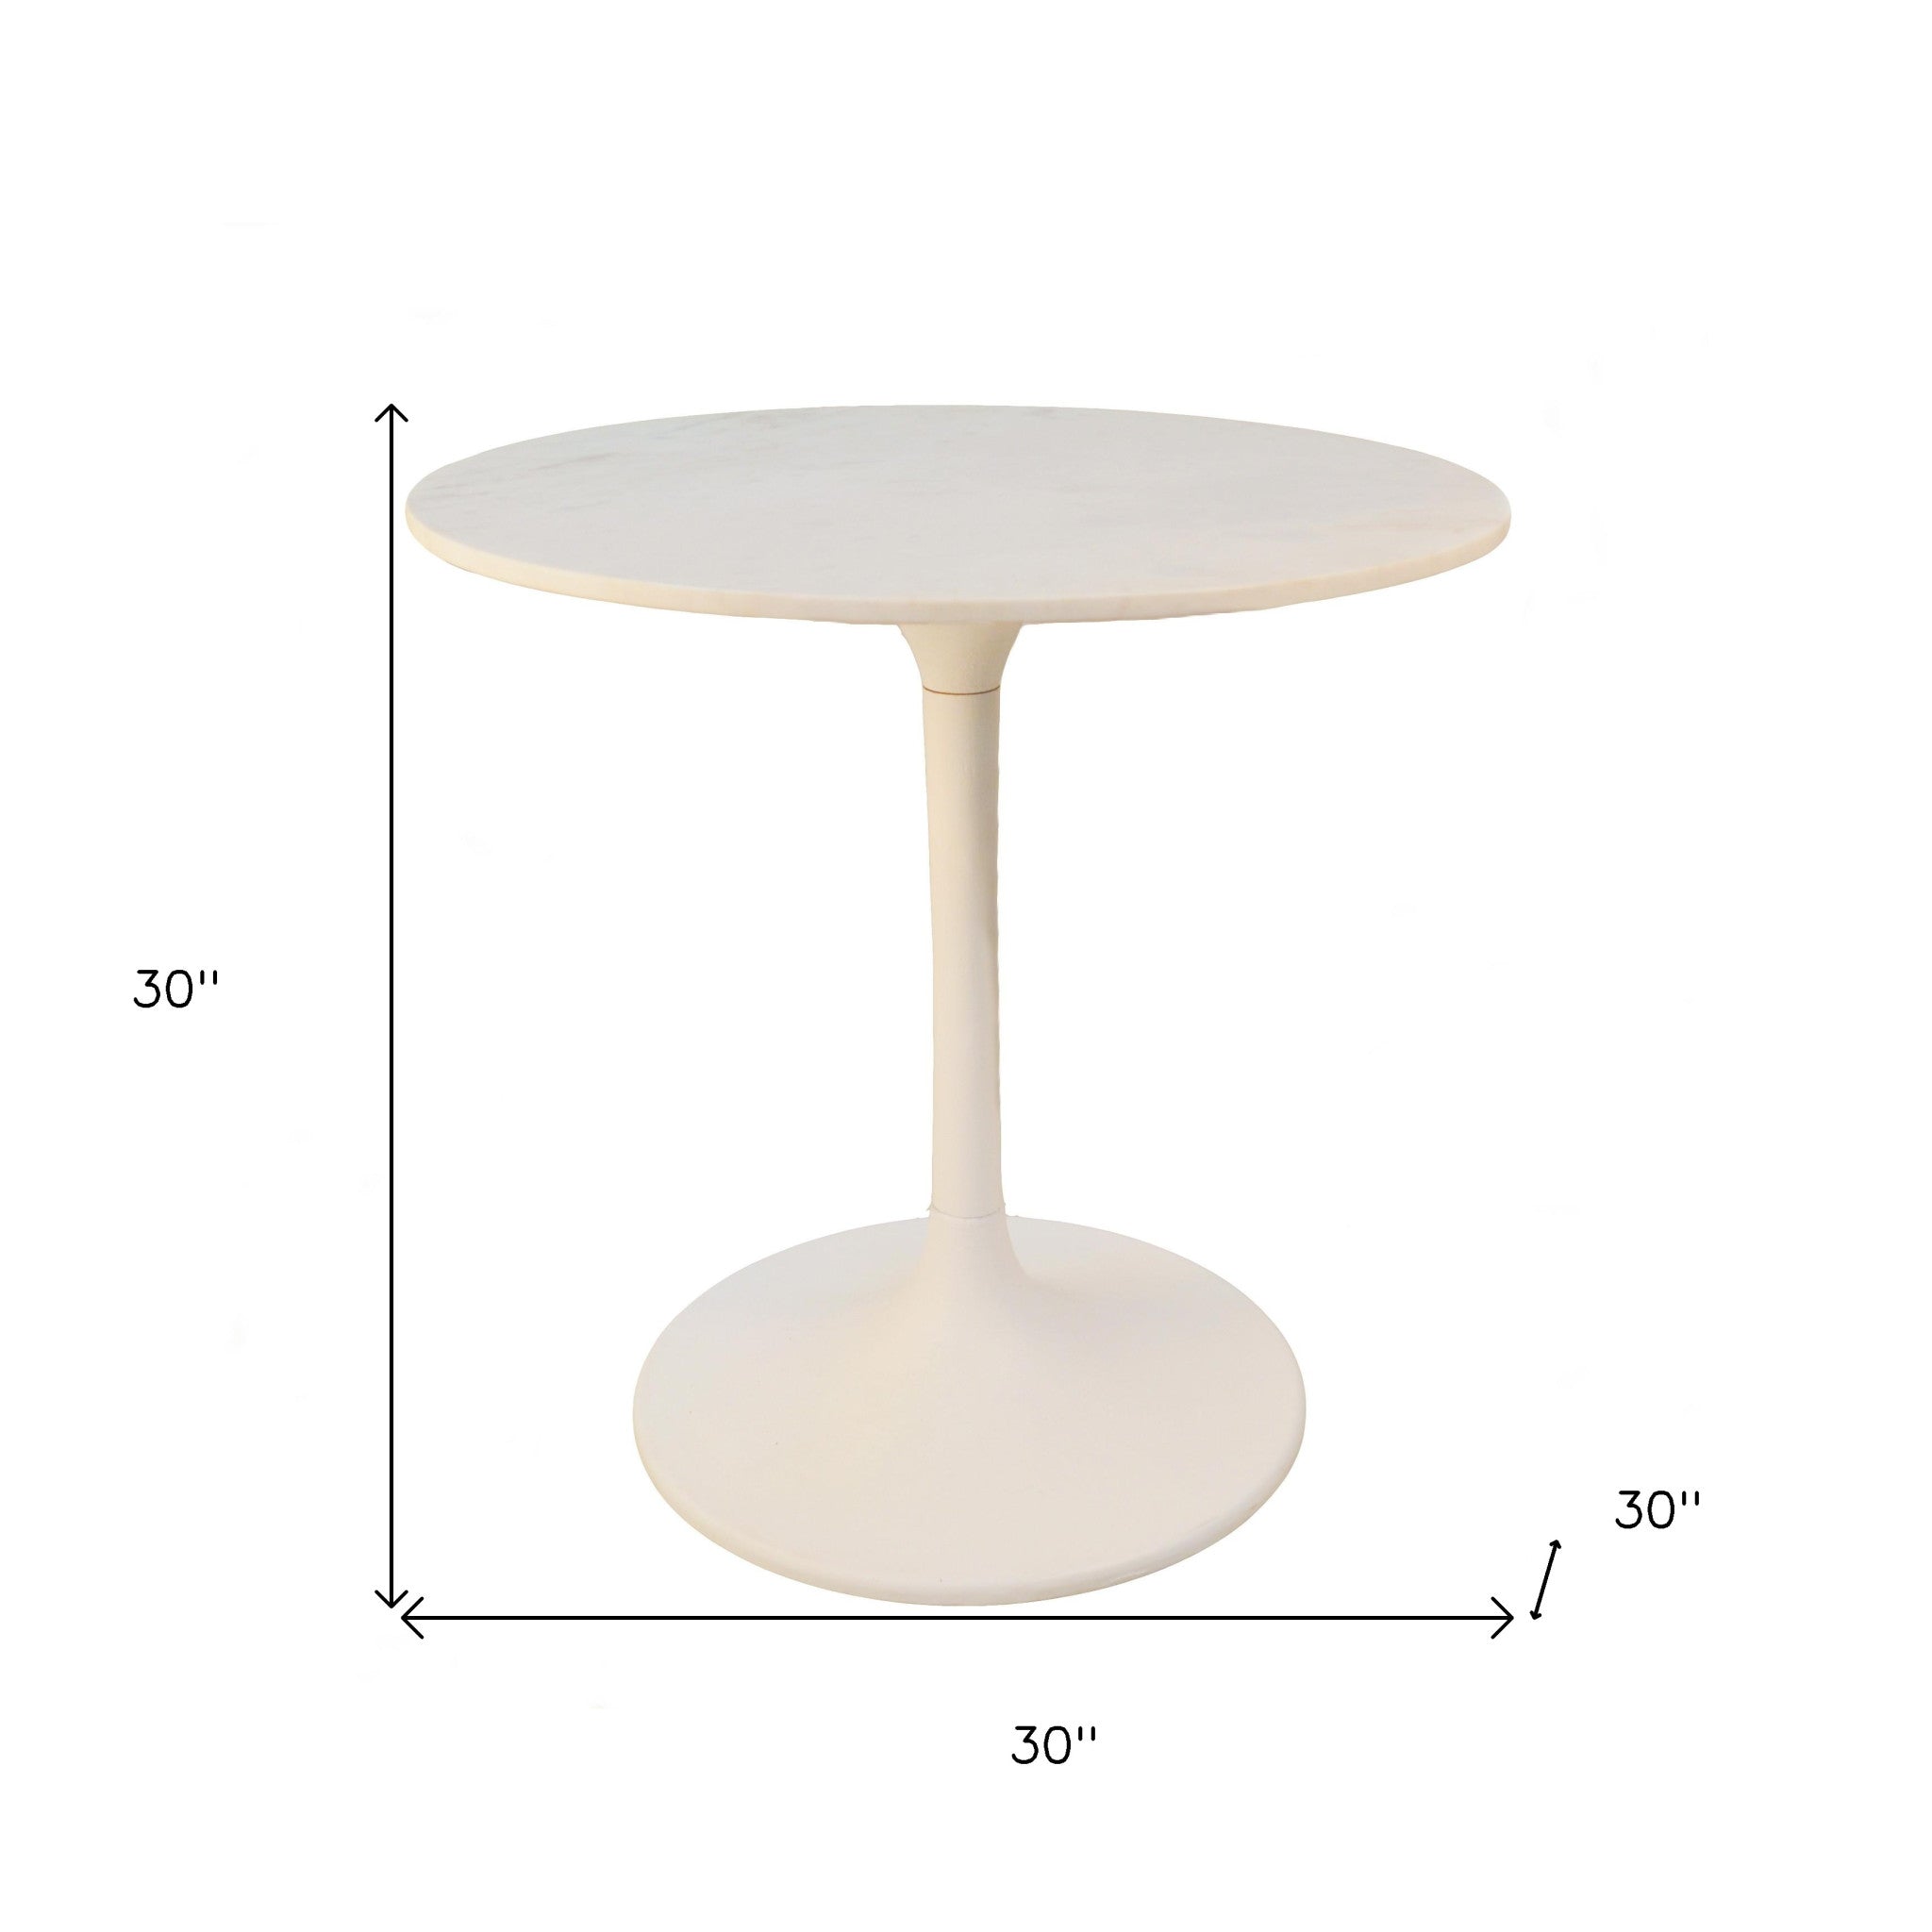 30" White Rounded Marble And Iron Pedestal Base Dining Table